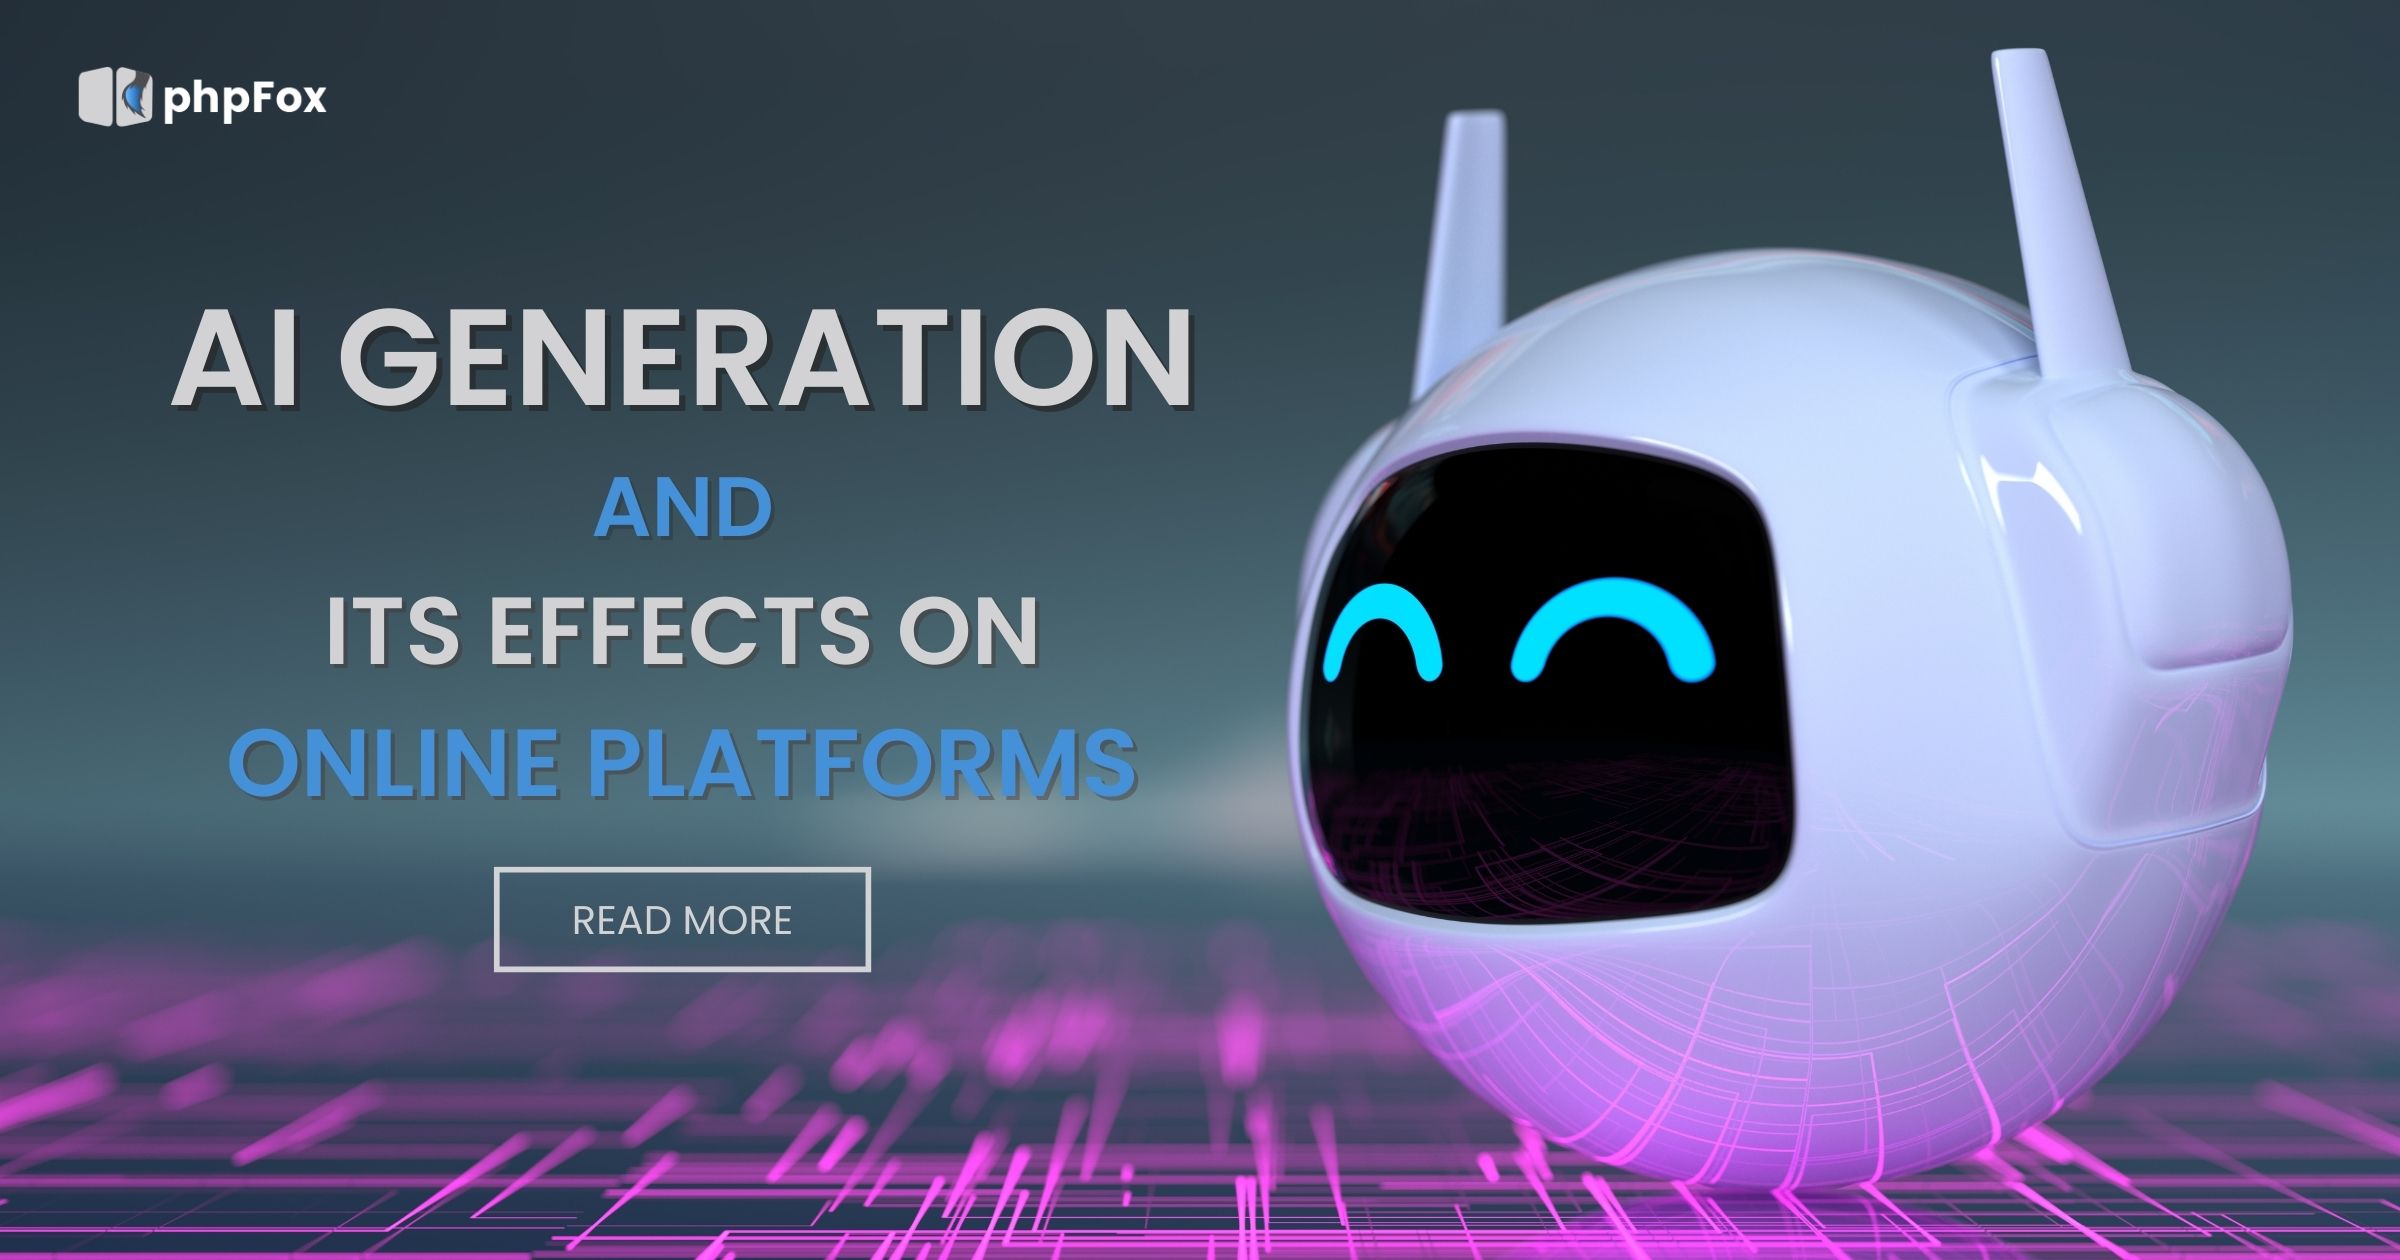 AI GENERATION AND ITS EFFECTS ON ONLINE PLATFORMS